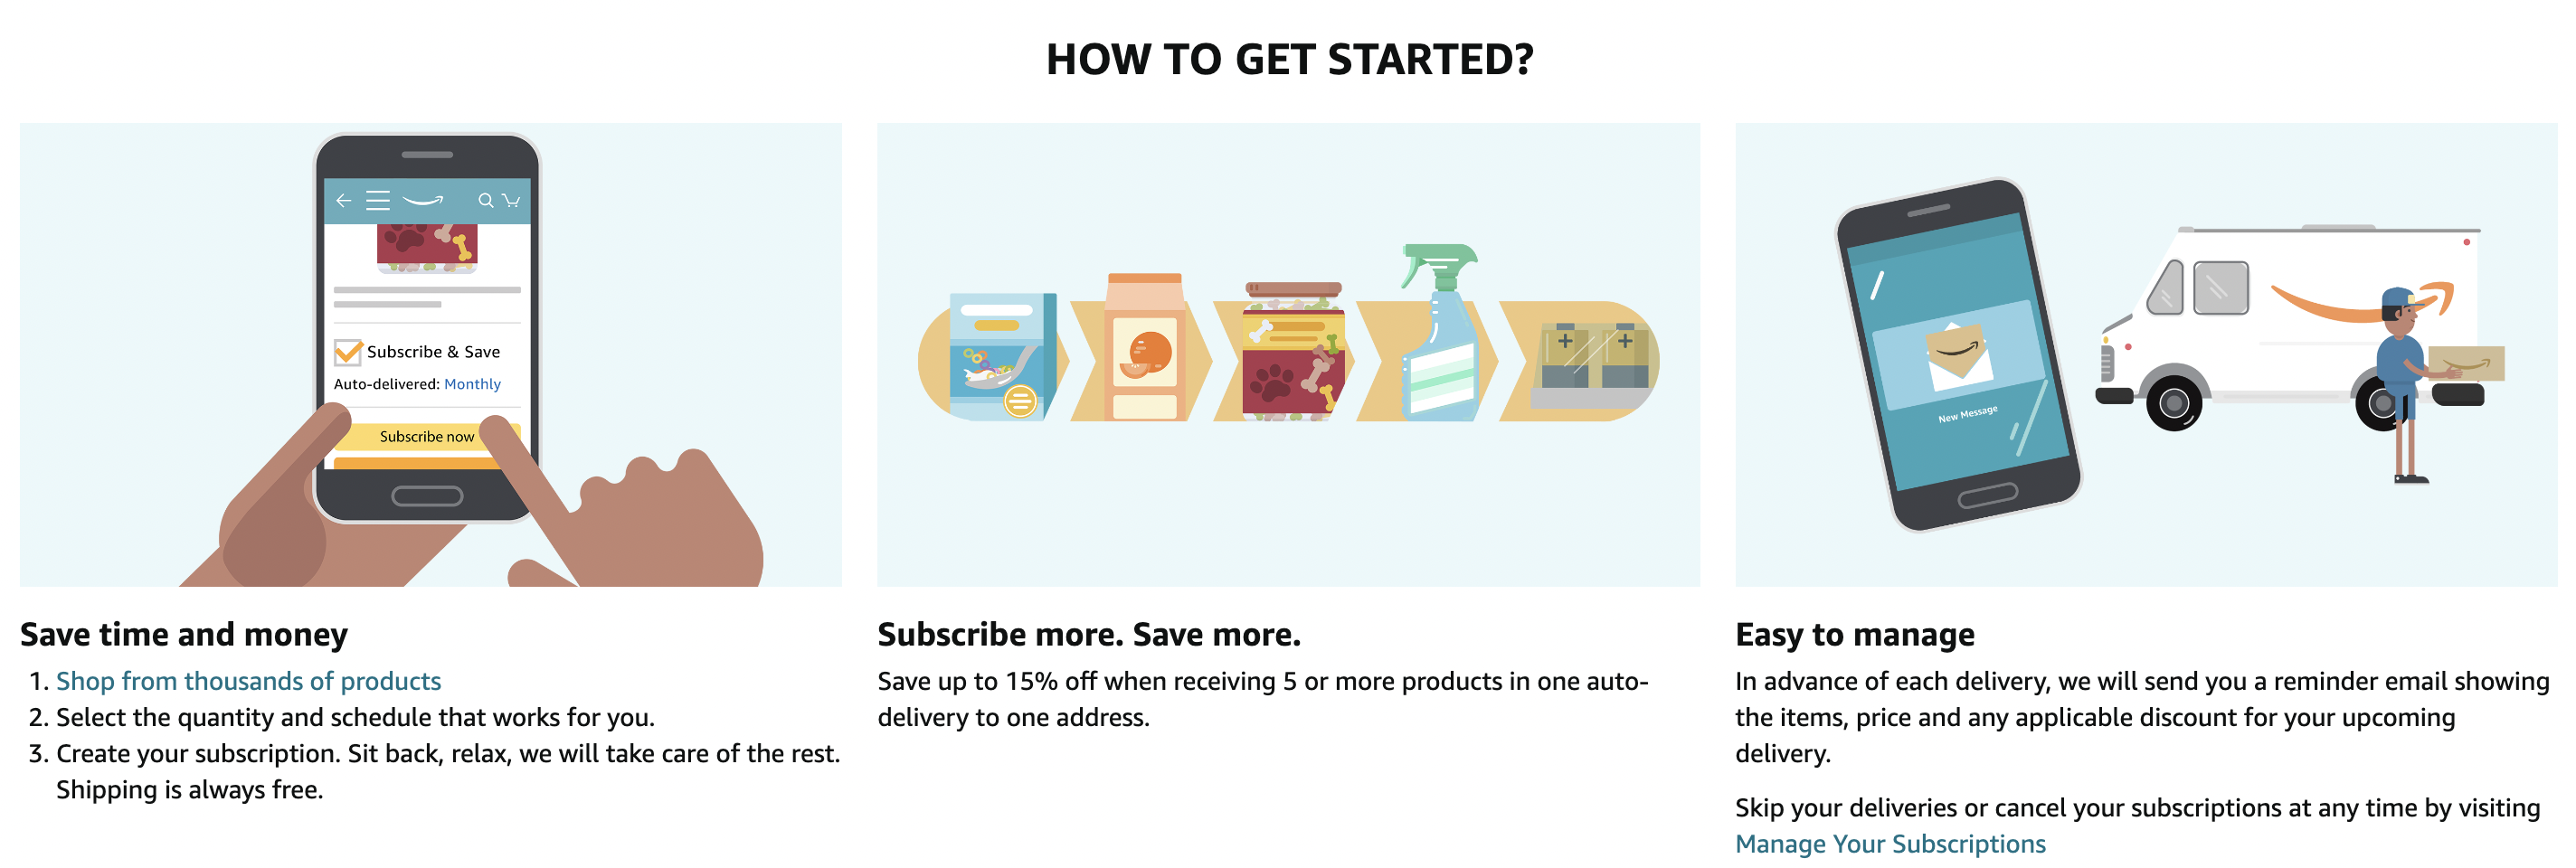 Subscribe & Save: Save up to 15% on everyday items you need